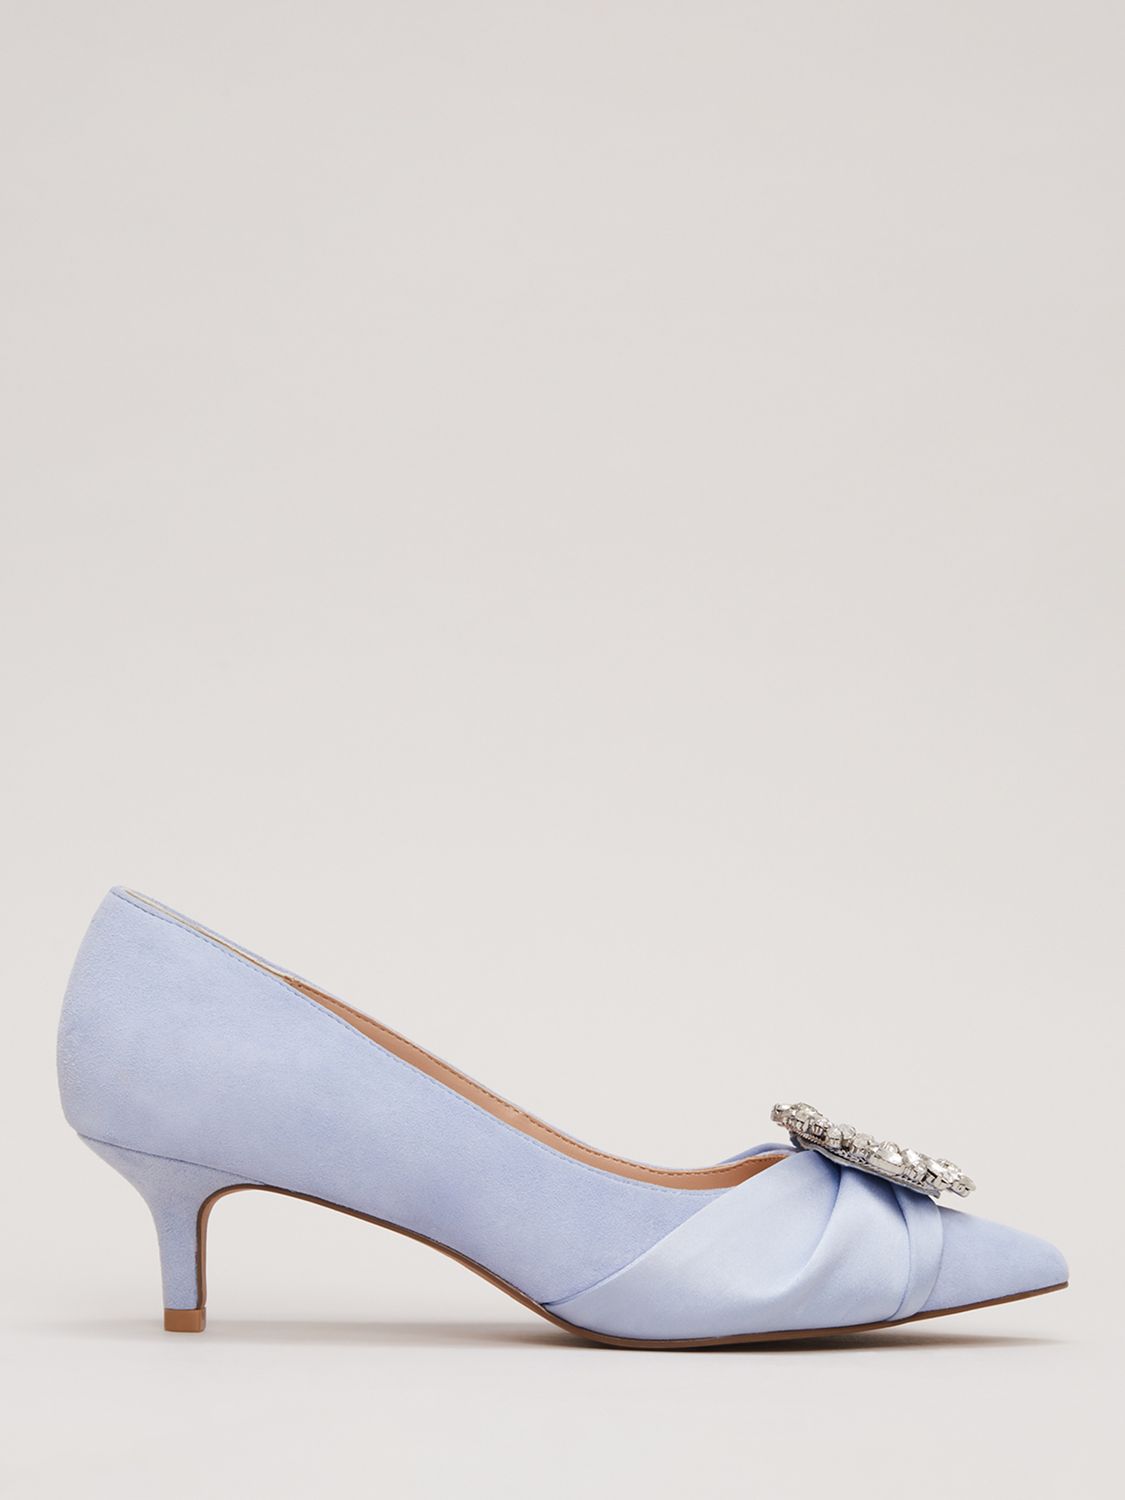 Phase Eight Suede Embellished Pointed Shoes, Pale Blue, EU36